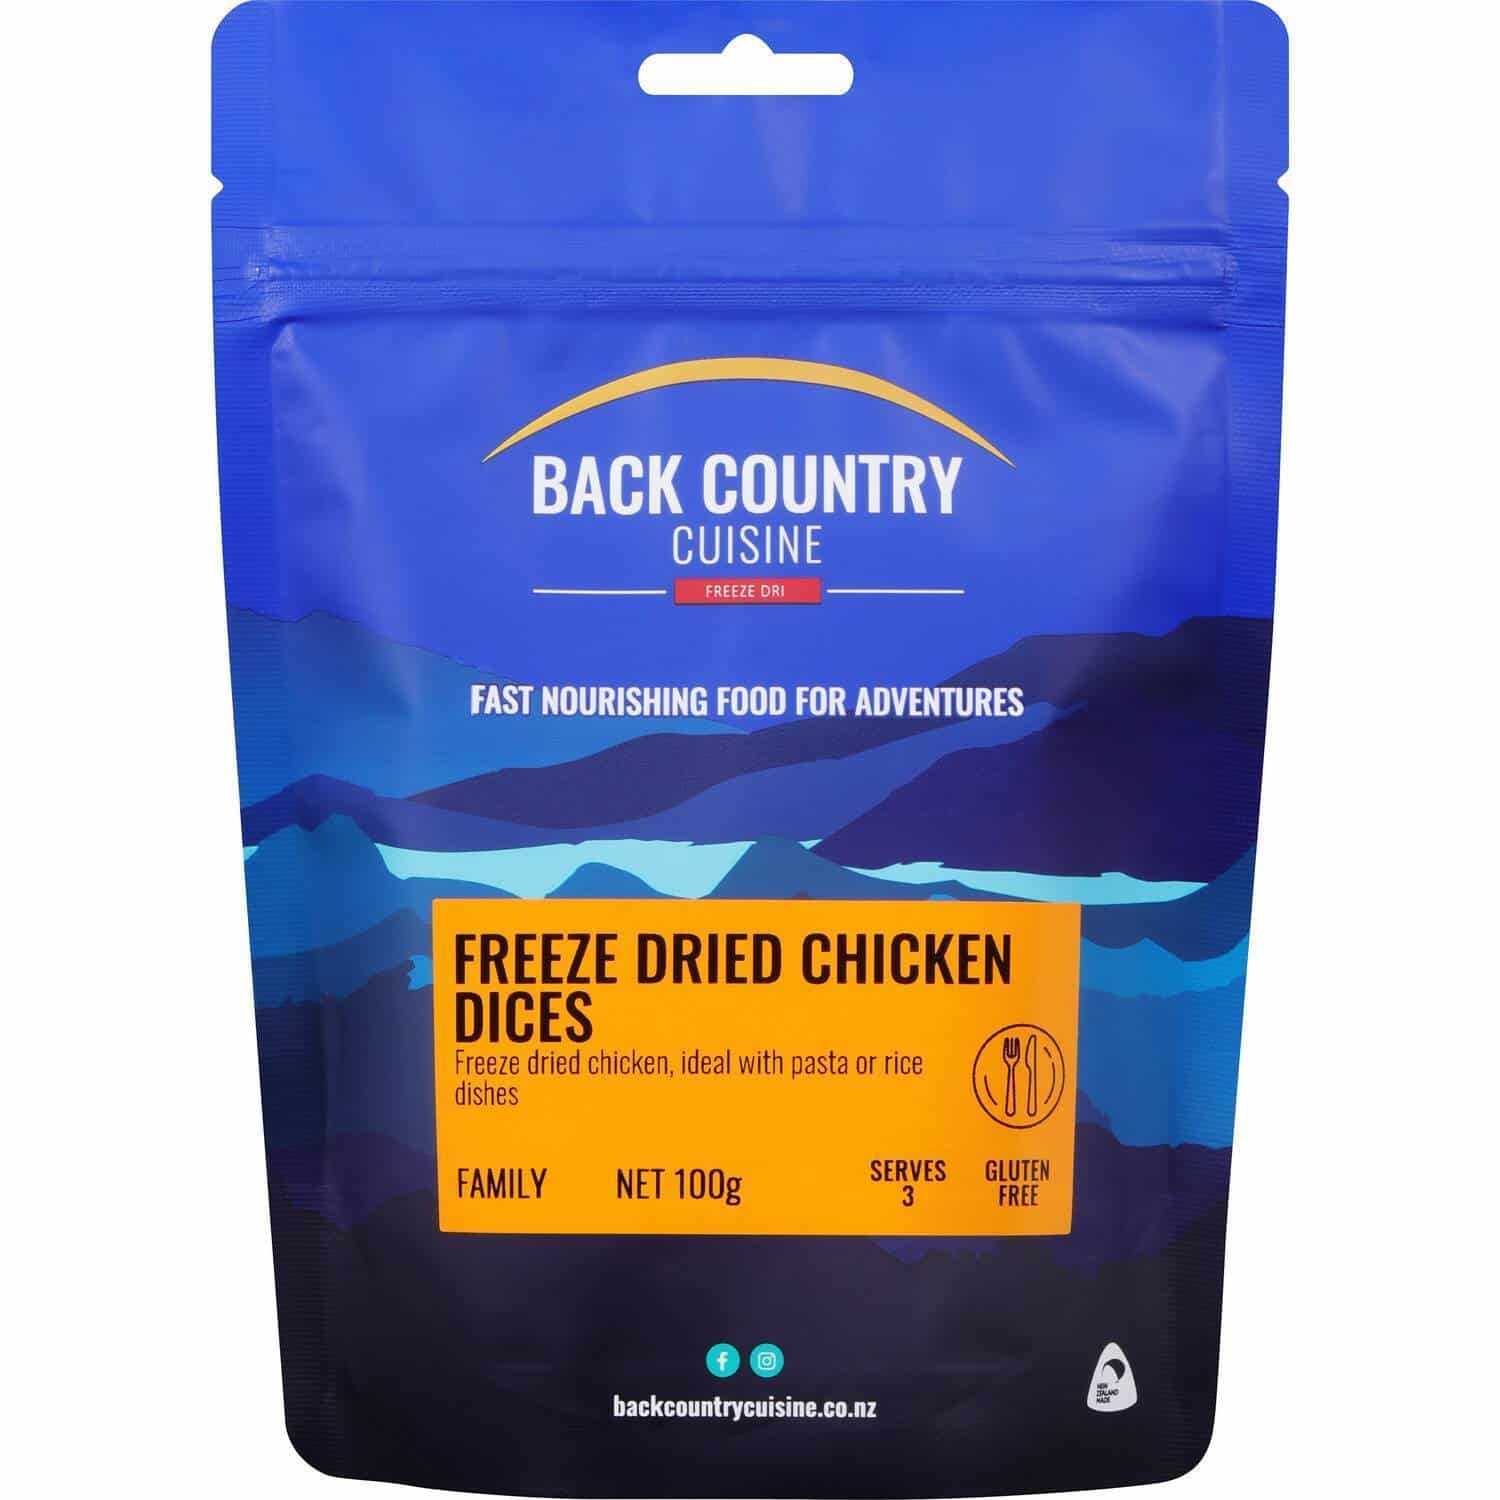 Back Country Cuisine Freeze-Dried Chicken Dices - Tramping Food and Accessories sold by Venture Outdoors NZ